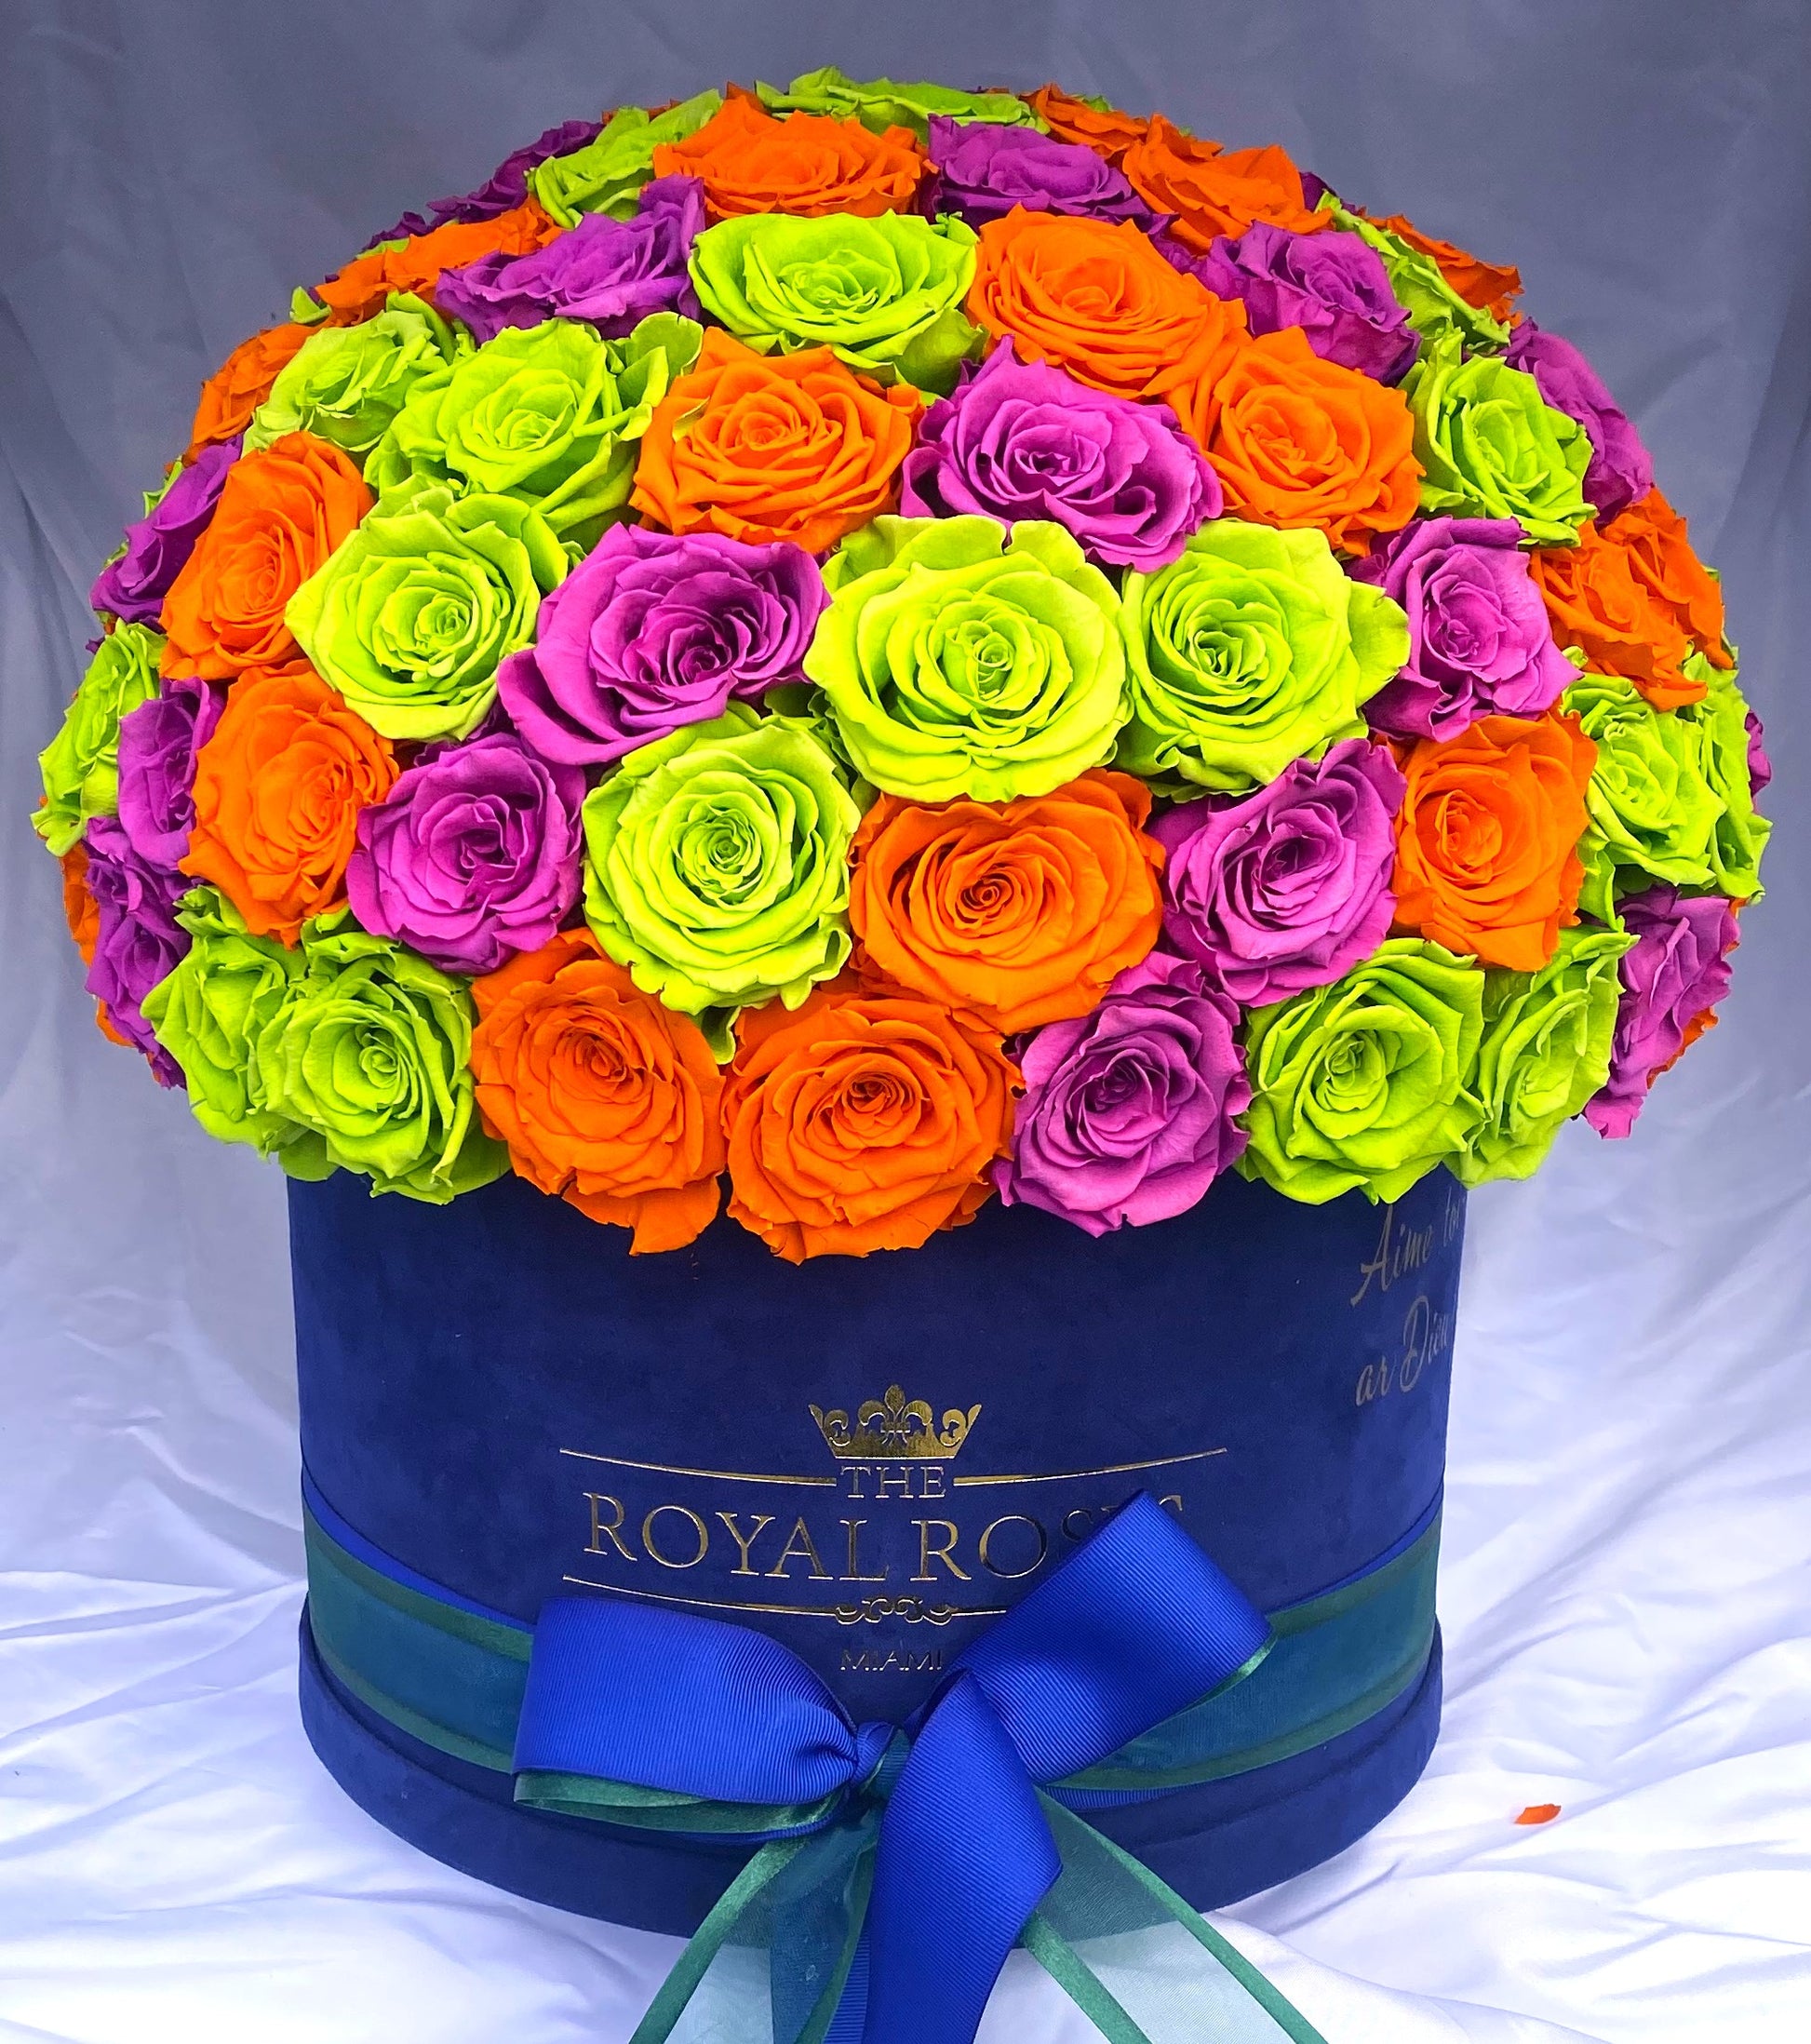 XL Dome Round Box - Ultimate expression - The Royal Roses 